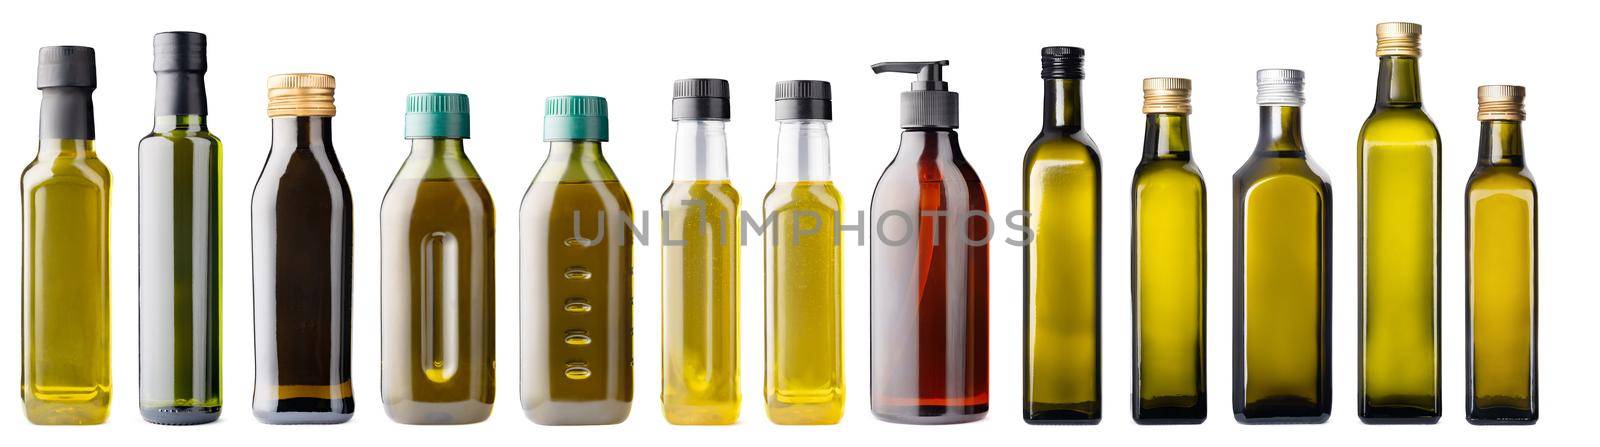 Row of olive oil bottles isolated on white by Fabrikasimf